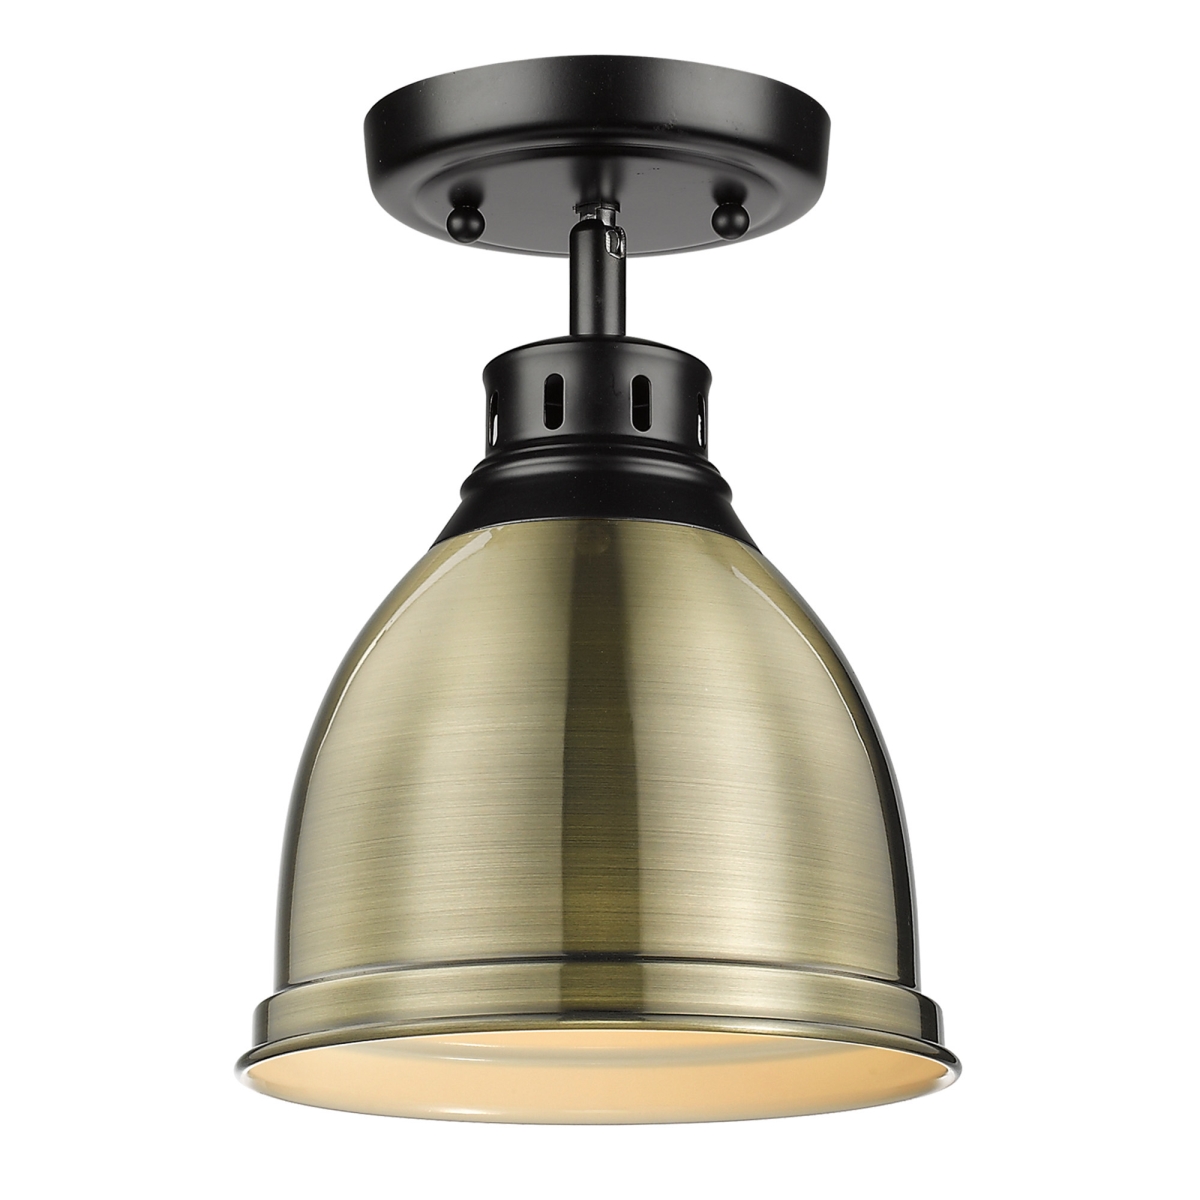 3602-fm Blk-ab Duncan Flush Mount In Black With An Aged Brass Shade